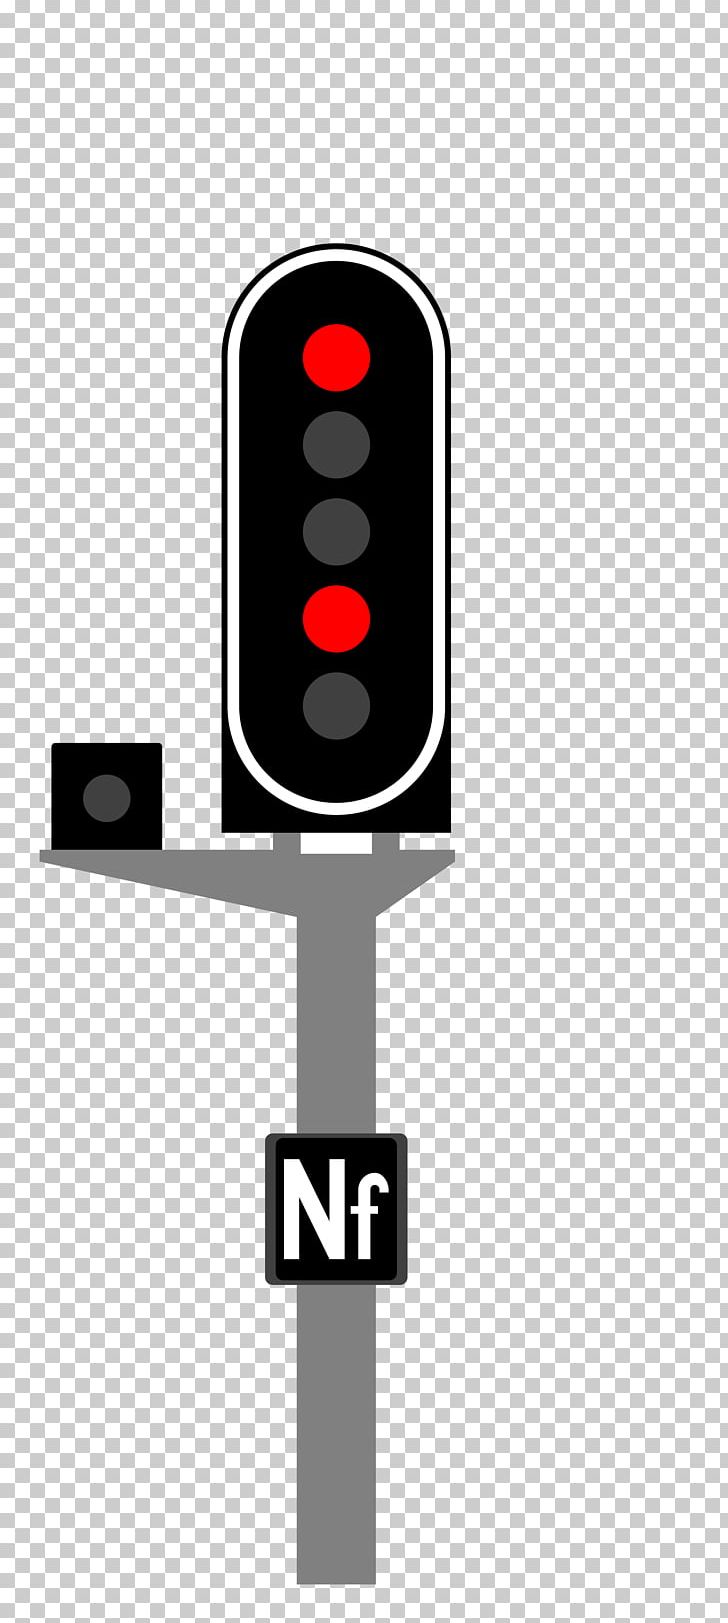 Train French Railway Signalling Carré Railway Semaphore Signal PNG, Clipart,  Free PNG Download